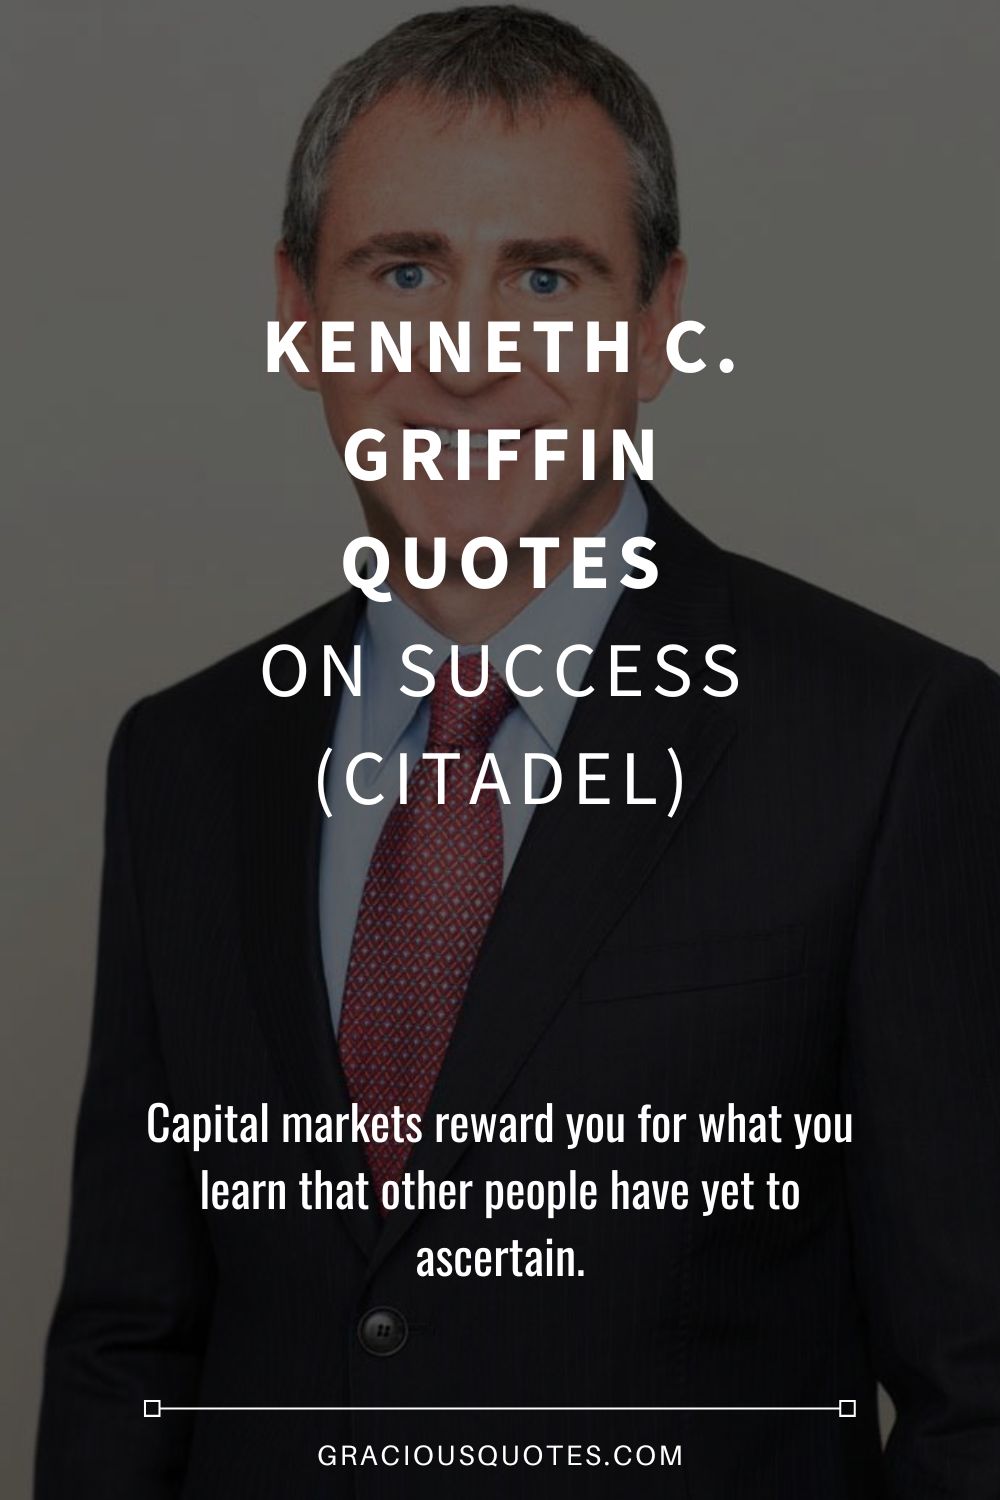 Kenneth C. Griffin Quotes on Success (CITADEL) - Gracious Quotes